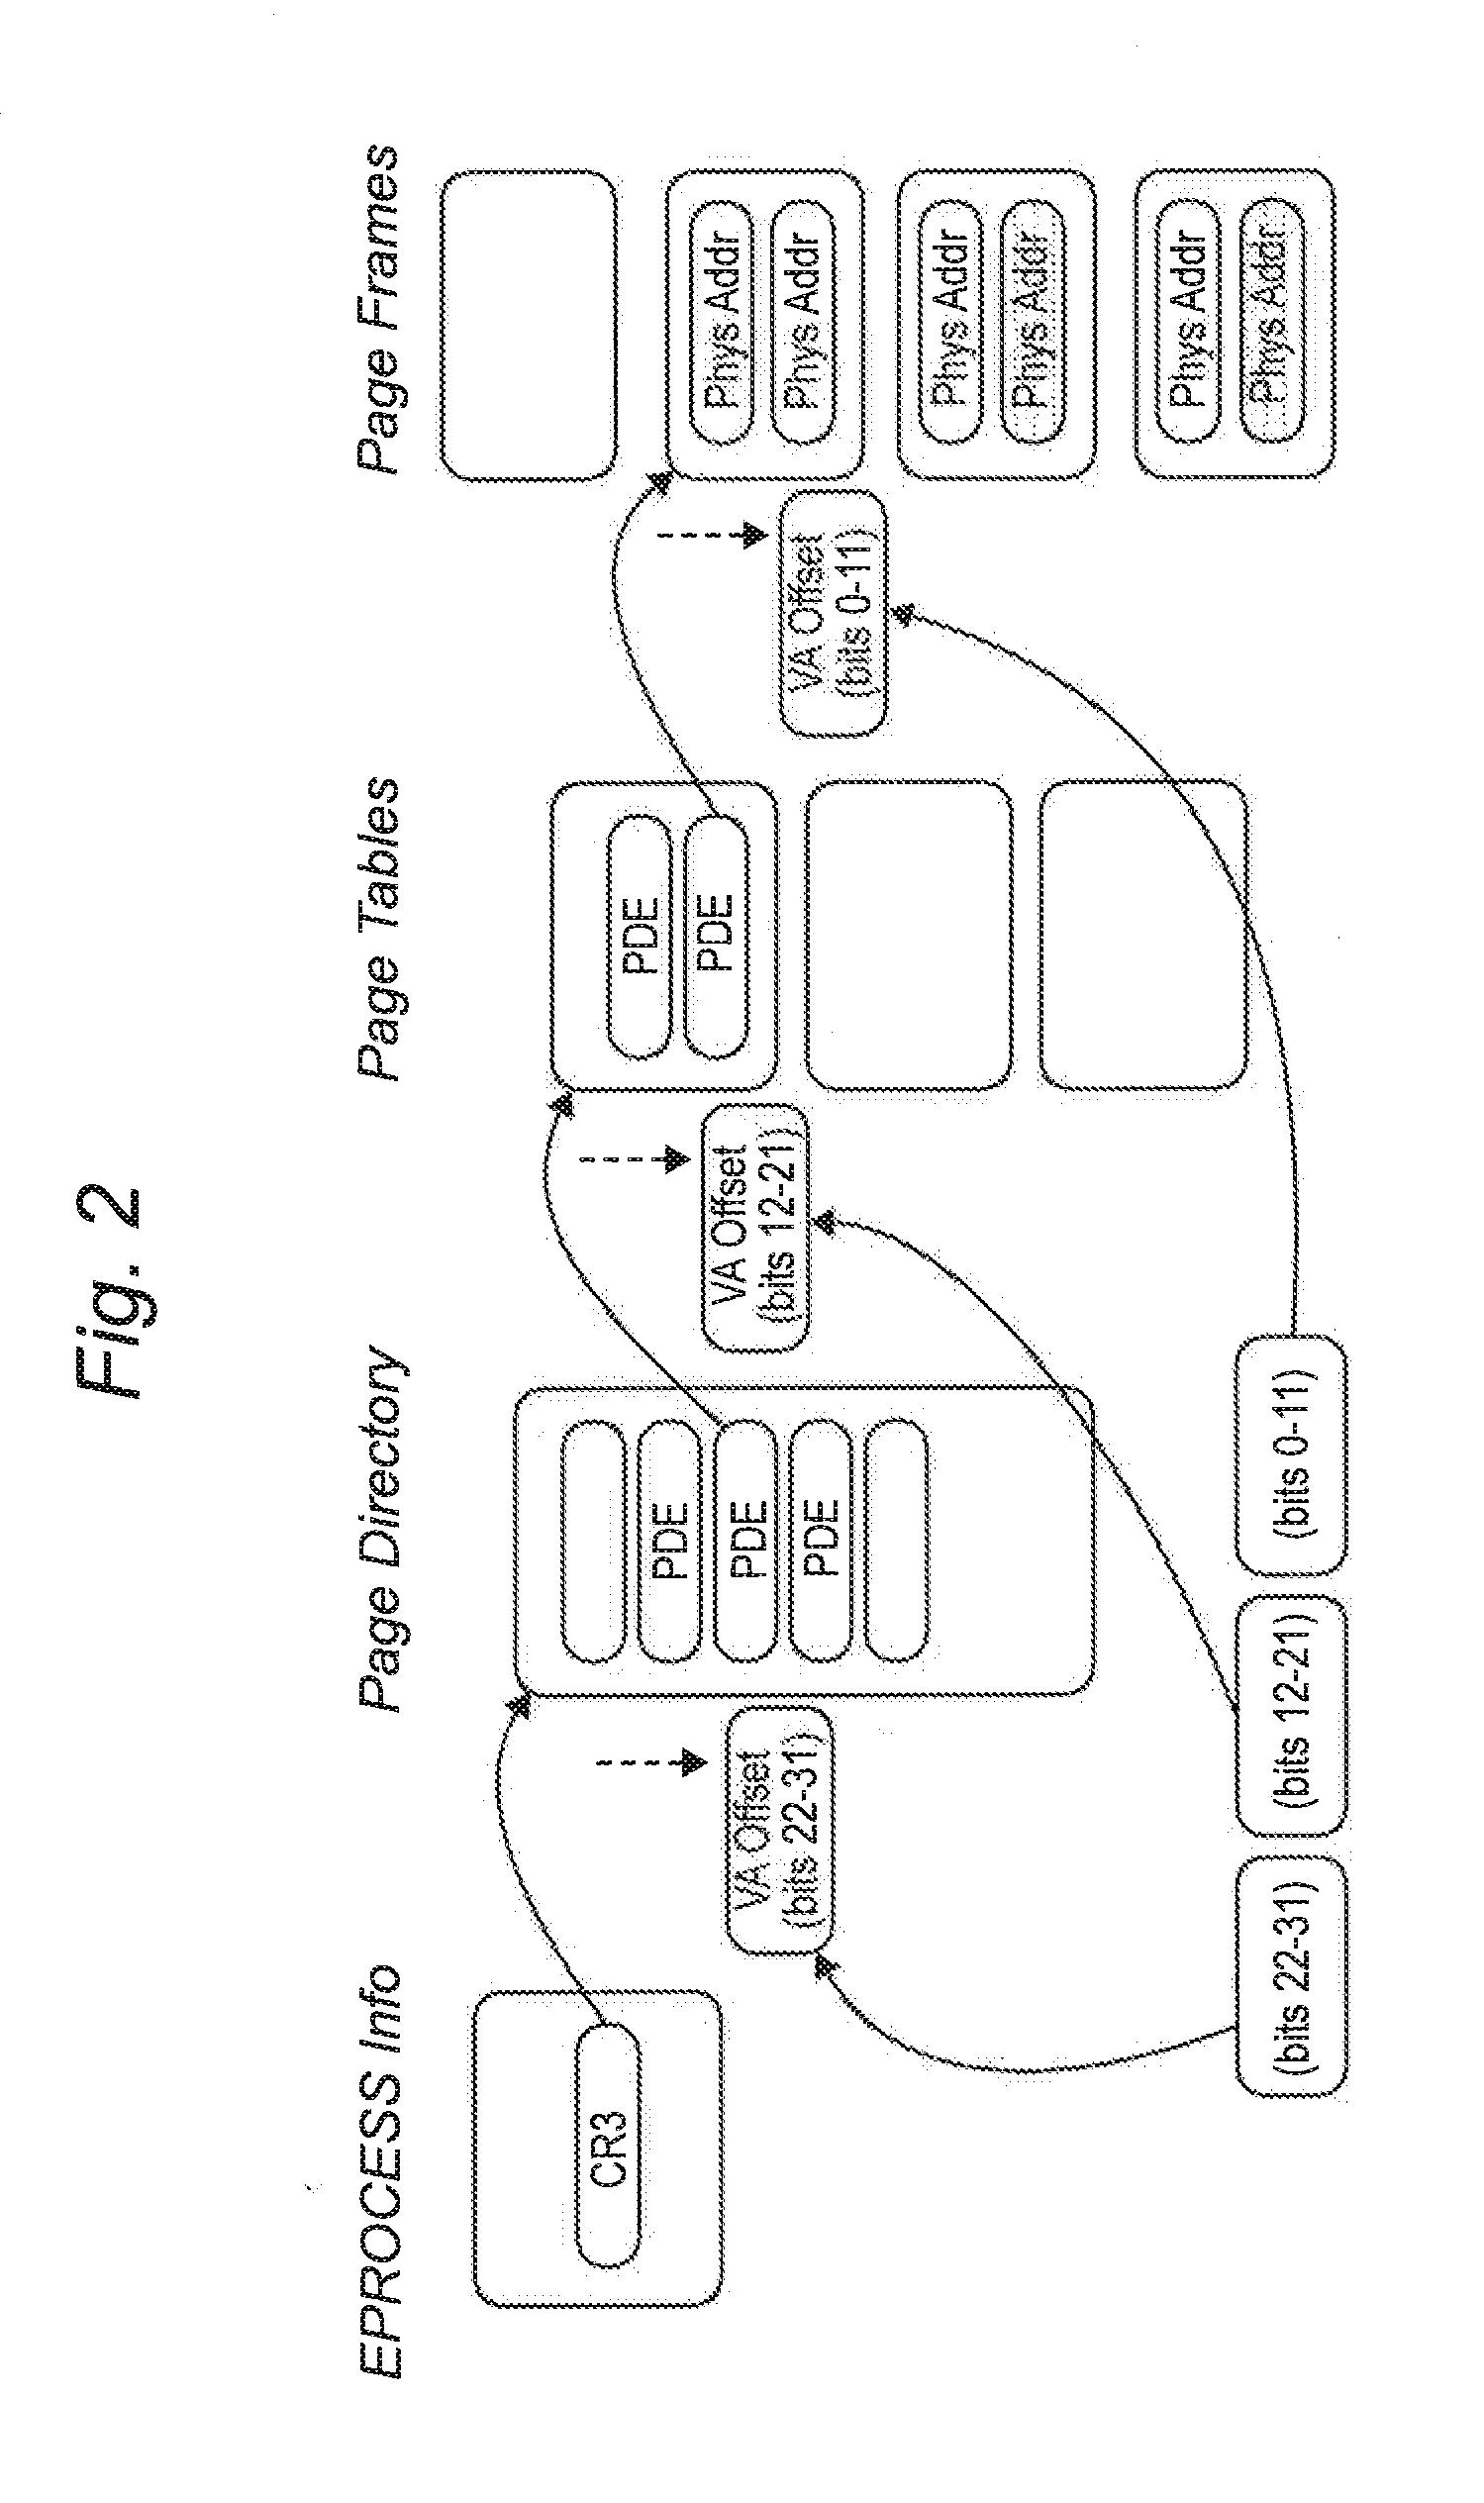 System and Method to Create a Number of Breakpoints in a Virtual Machine Via Virtual Machine Trapping Events